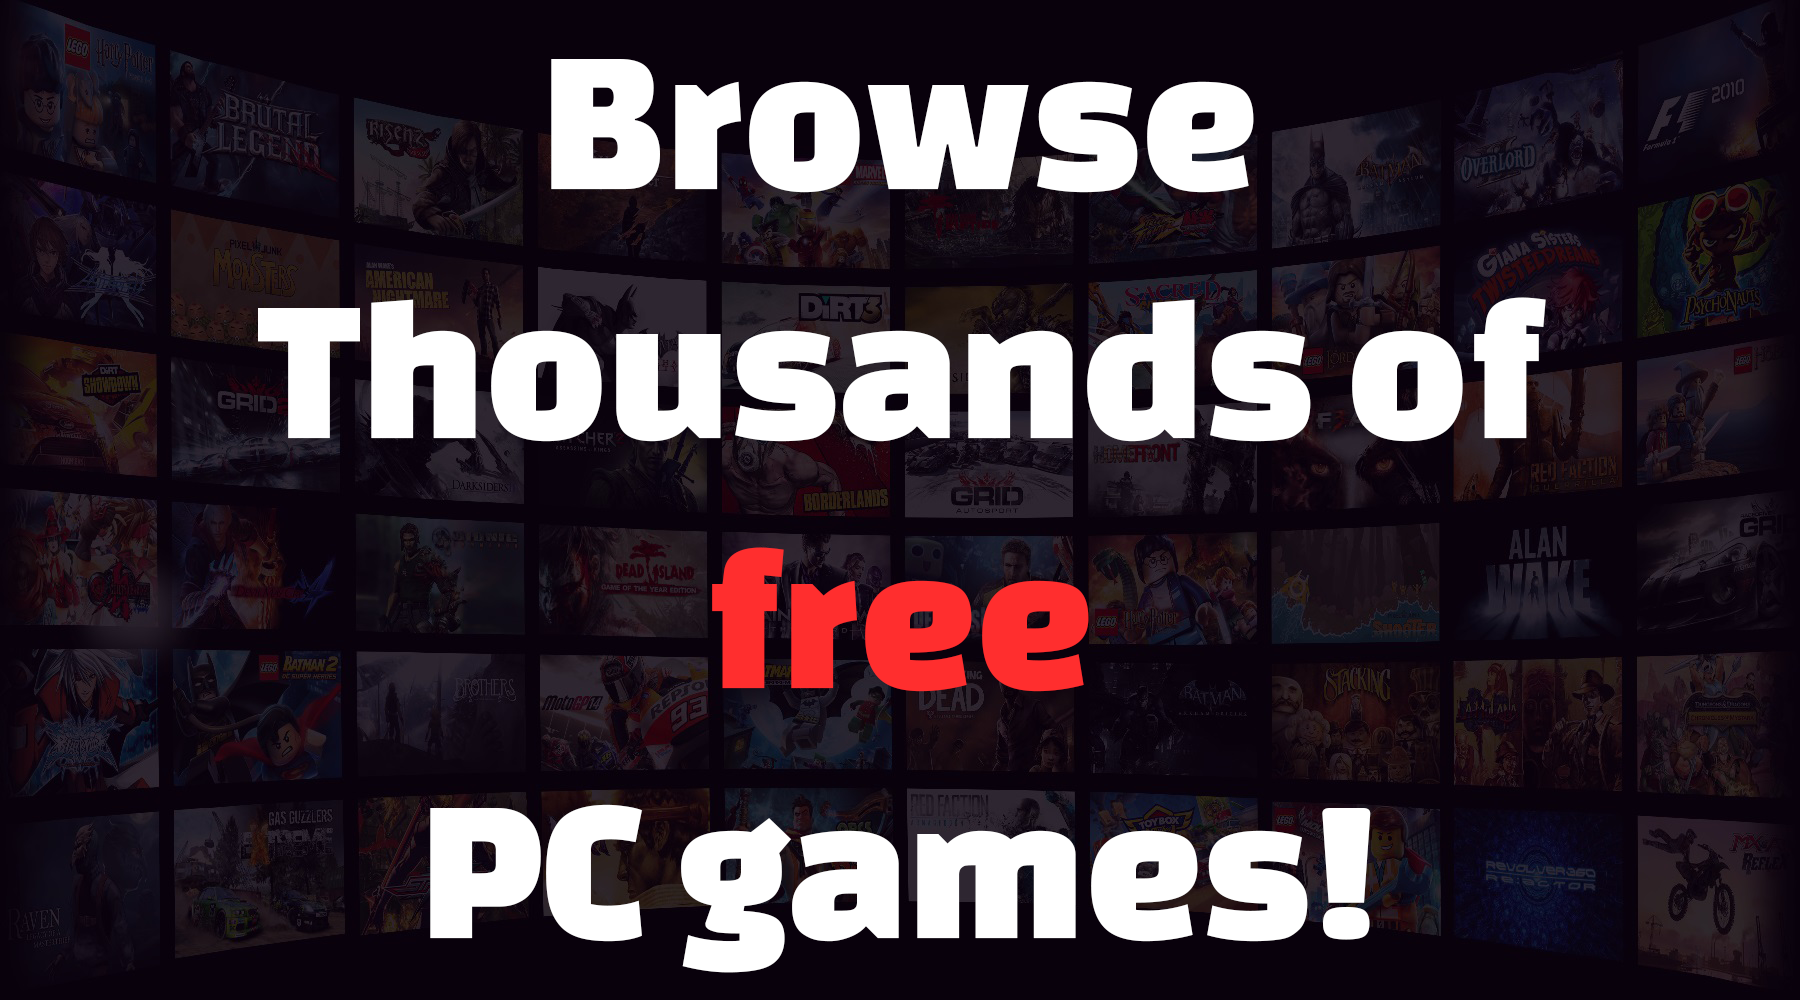 PC Games Background